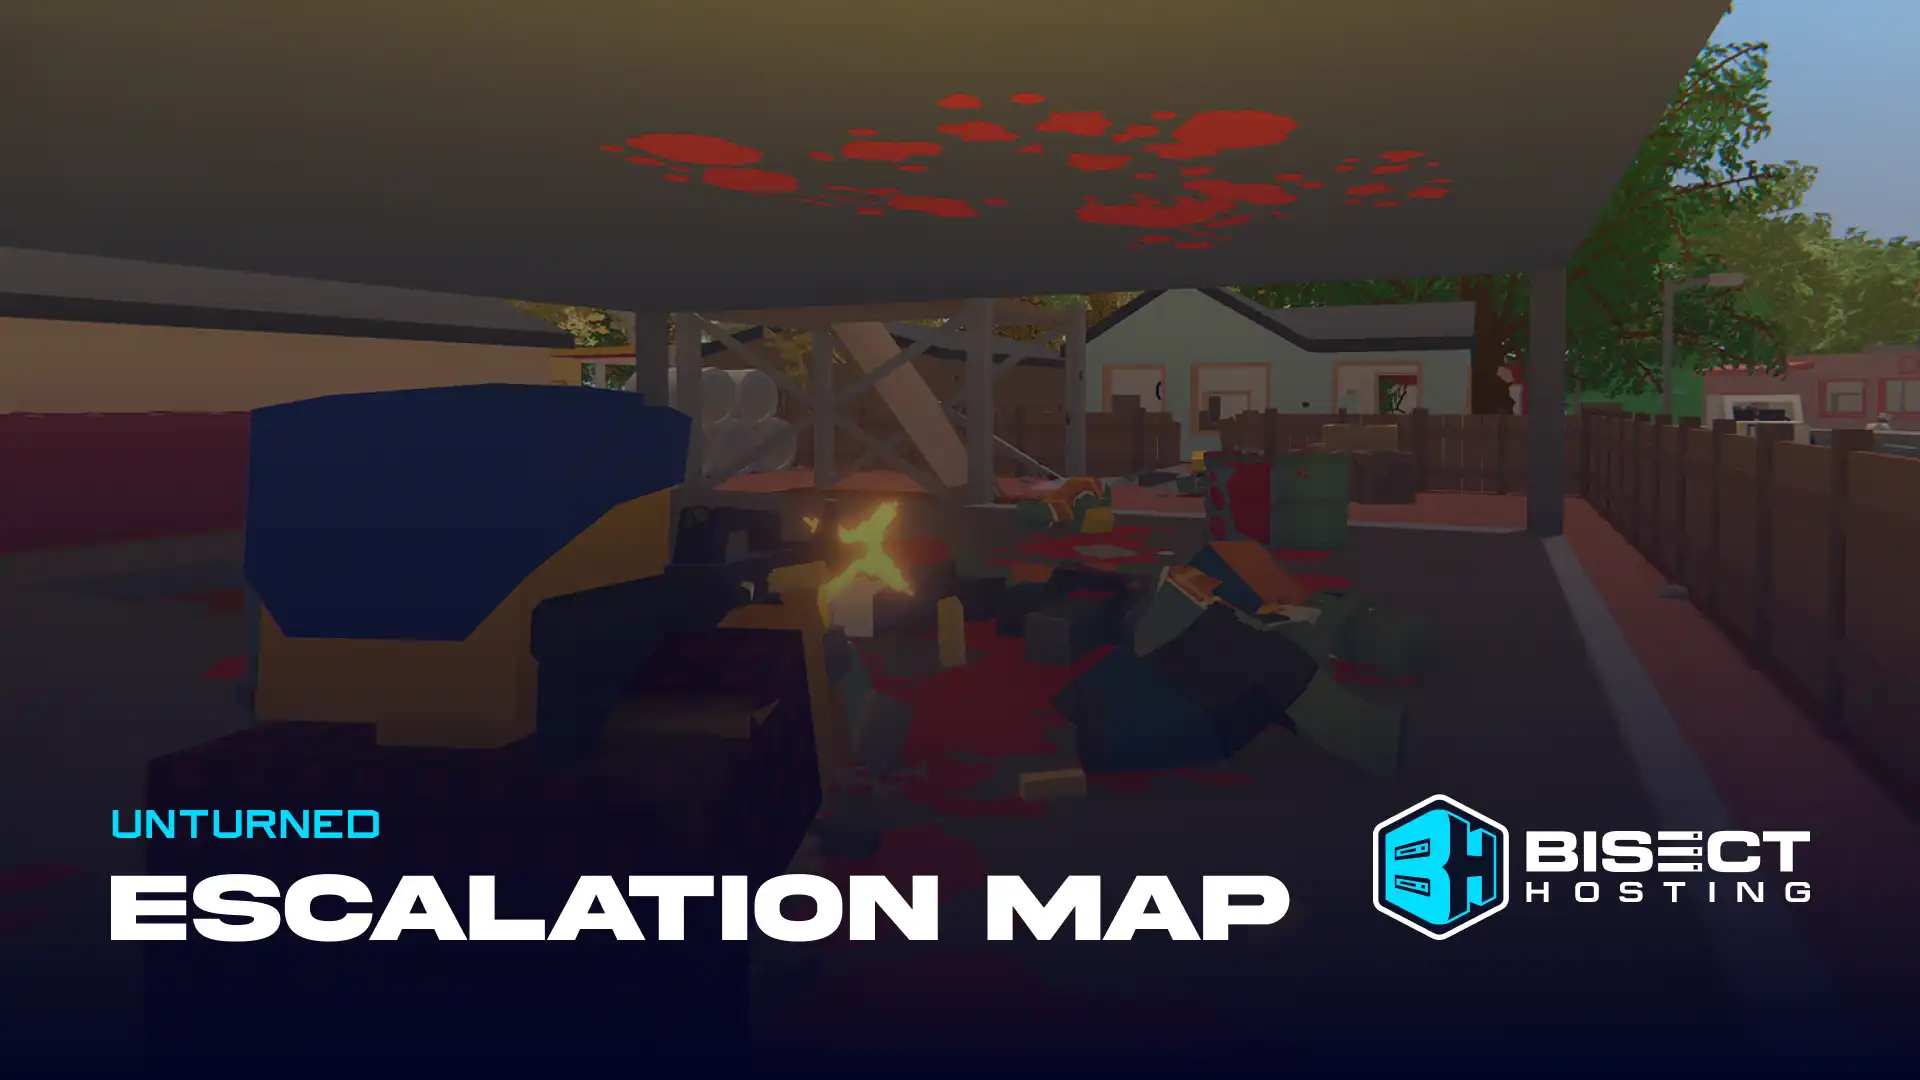 Unturned Escalation Map Guide: Features, Base Locations, Item IDs, & More